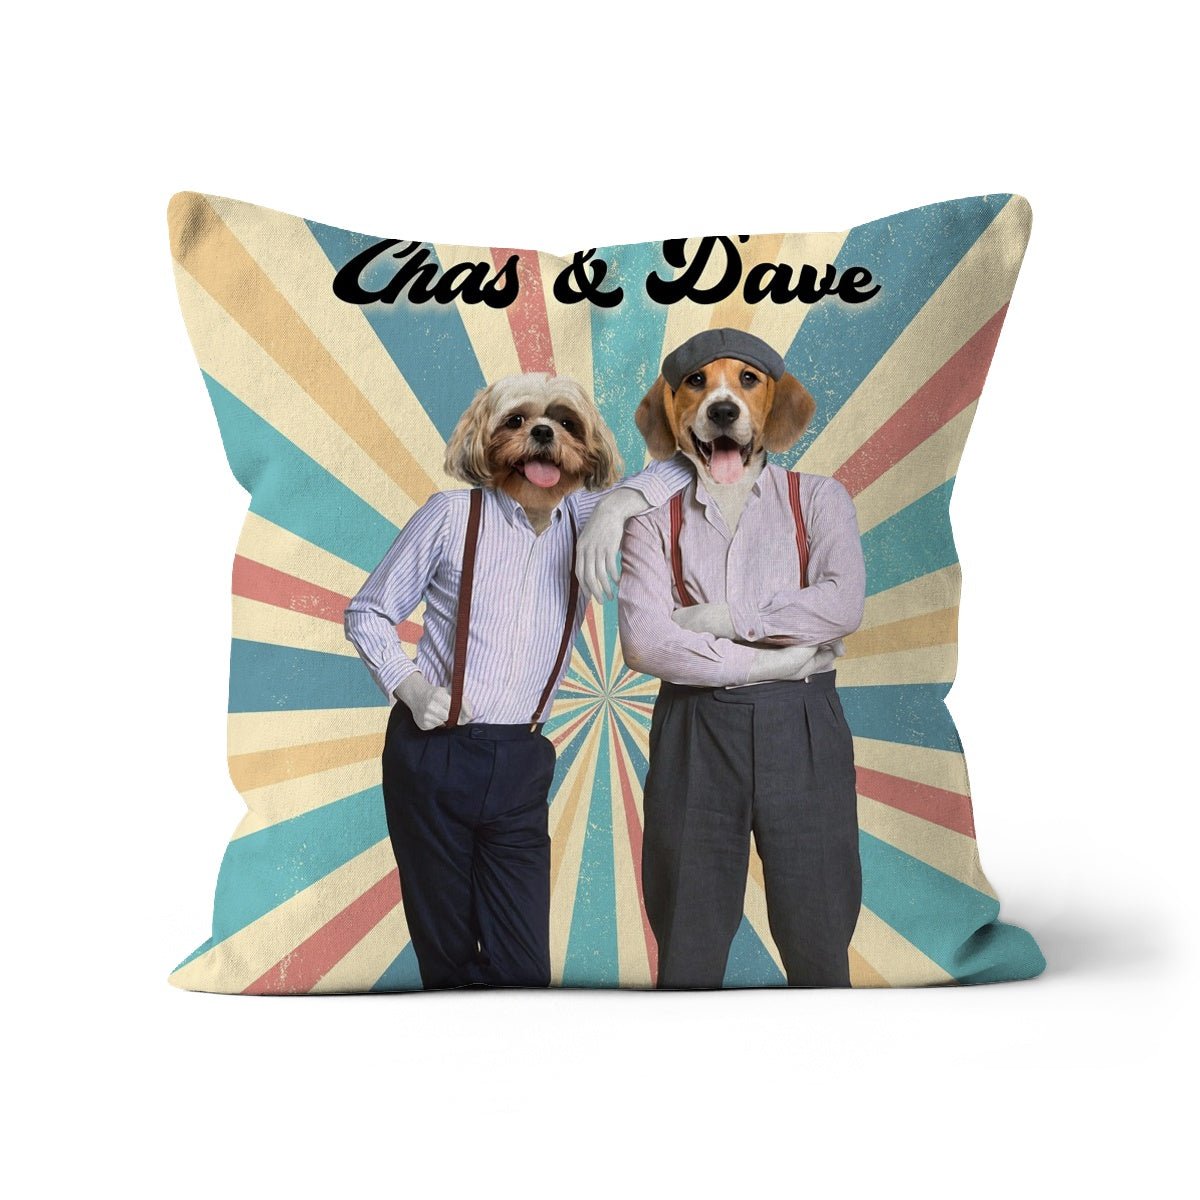 Chas & Dave: Custom Pet Cushion - Paw & Glory - #pet portraits# - #dog portraits# - #pet portraits uk#paw and glory, pet portraits cushion,personalised dog pillows, dog photo on pillow, pillow with dogs face, dog pillow cases, pillow custom, pet custom pillow